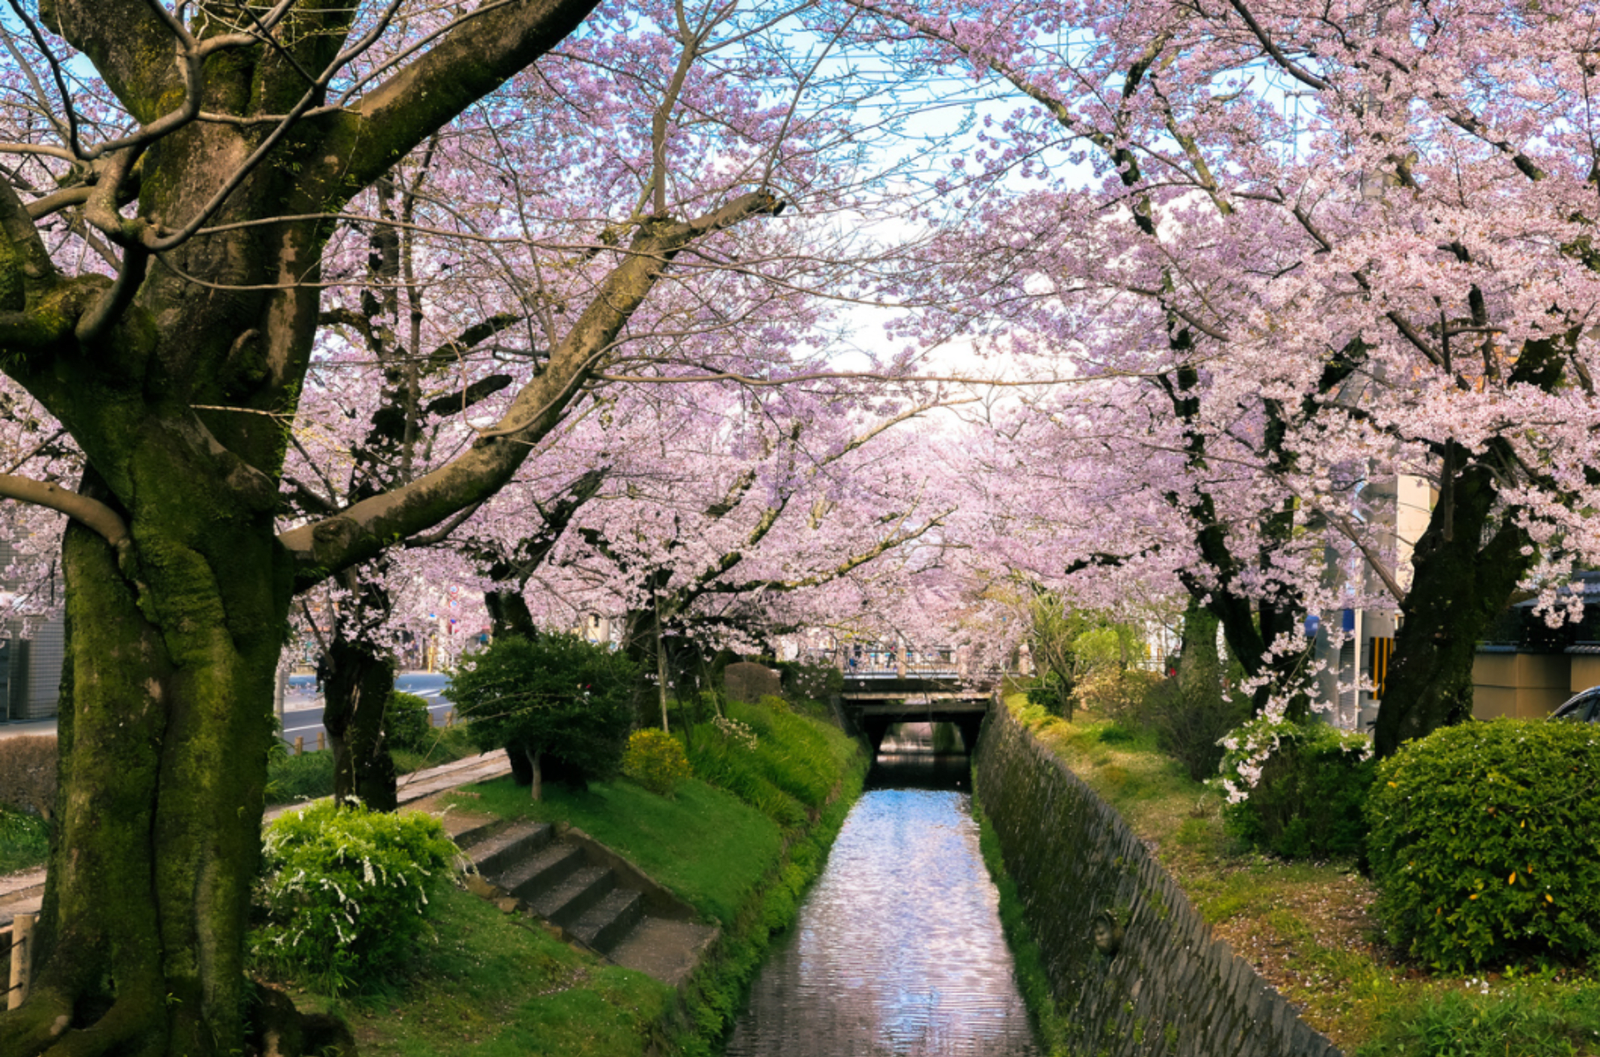 Pink cherry blossoms in flower along a canal